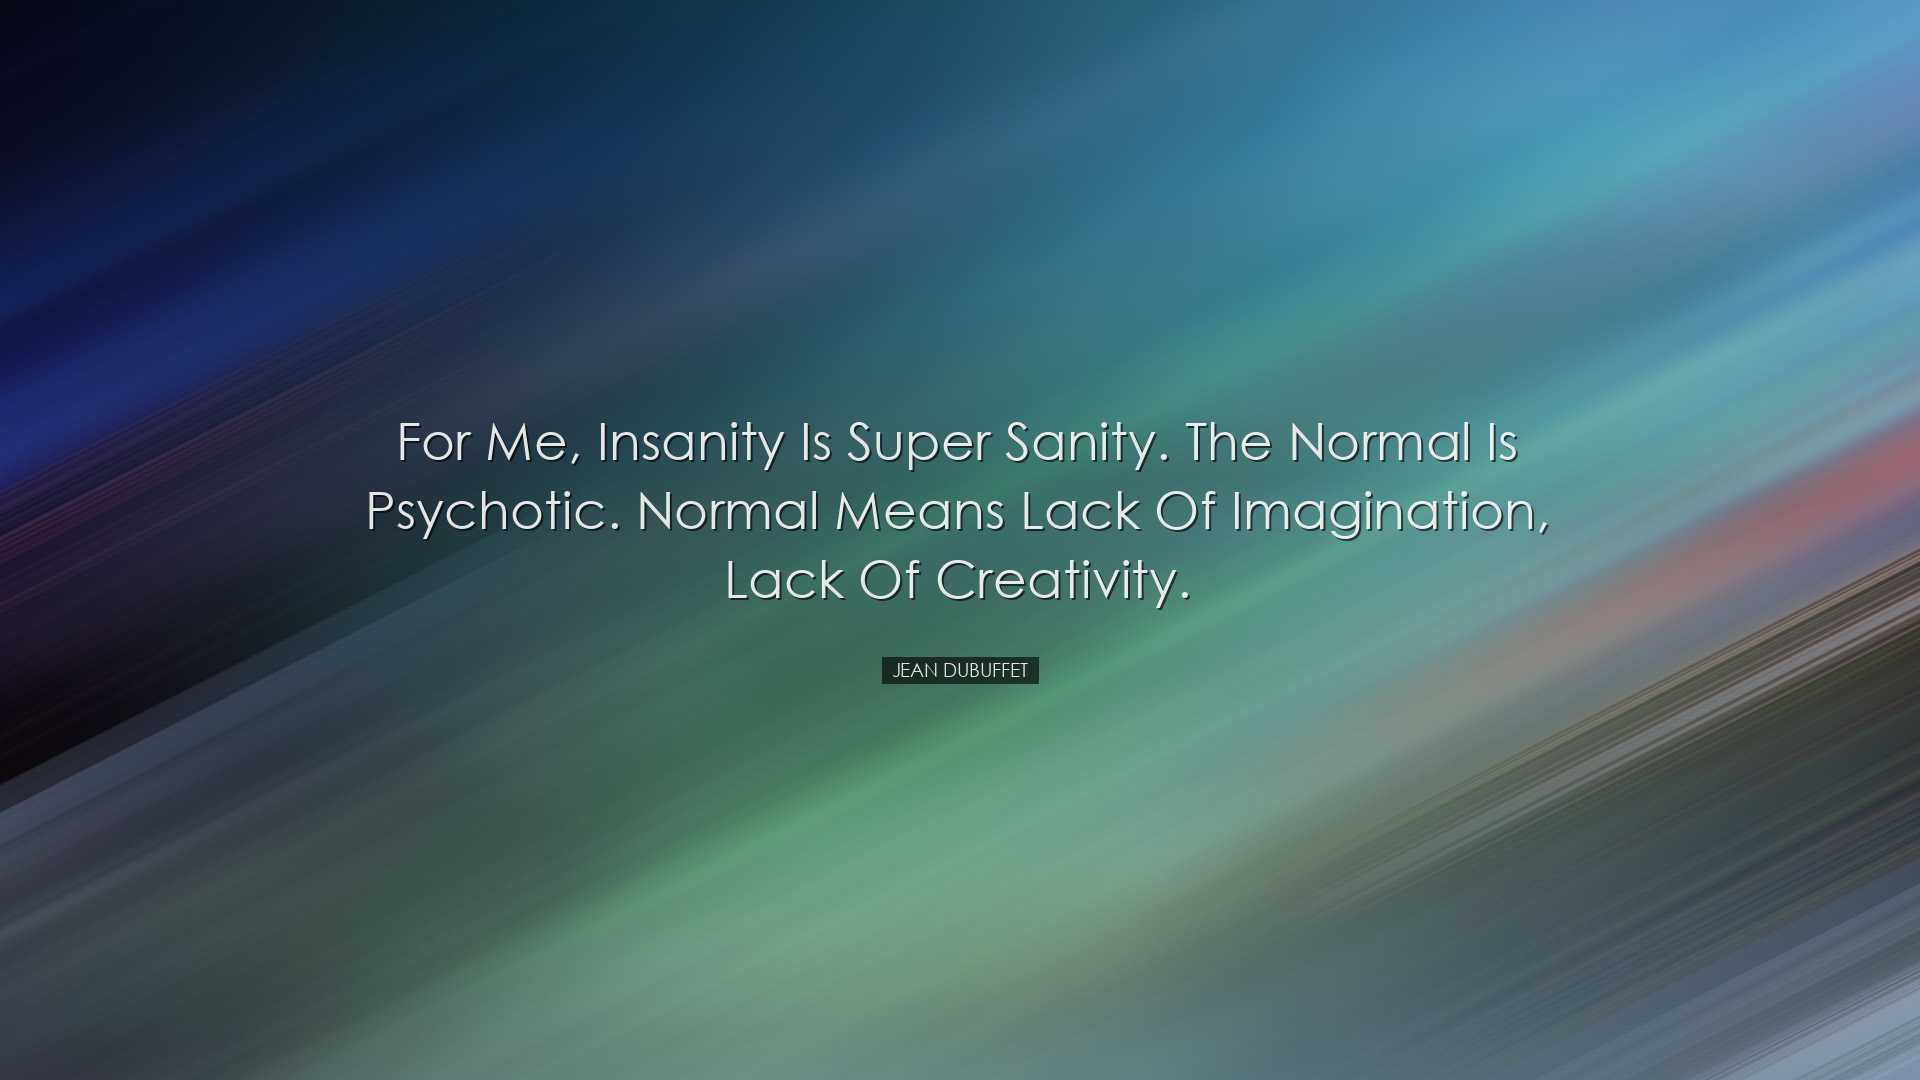 For me, insanity is super sanity. The normal is psychotic. Normal